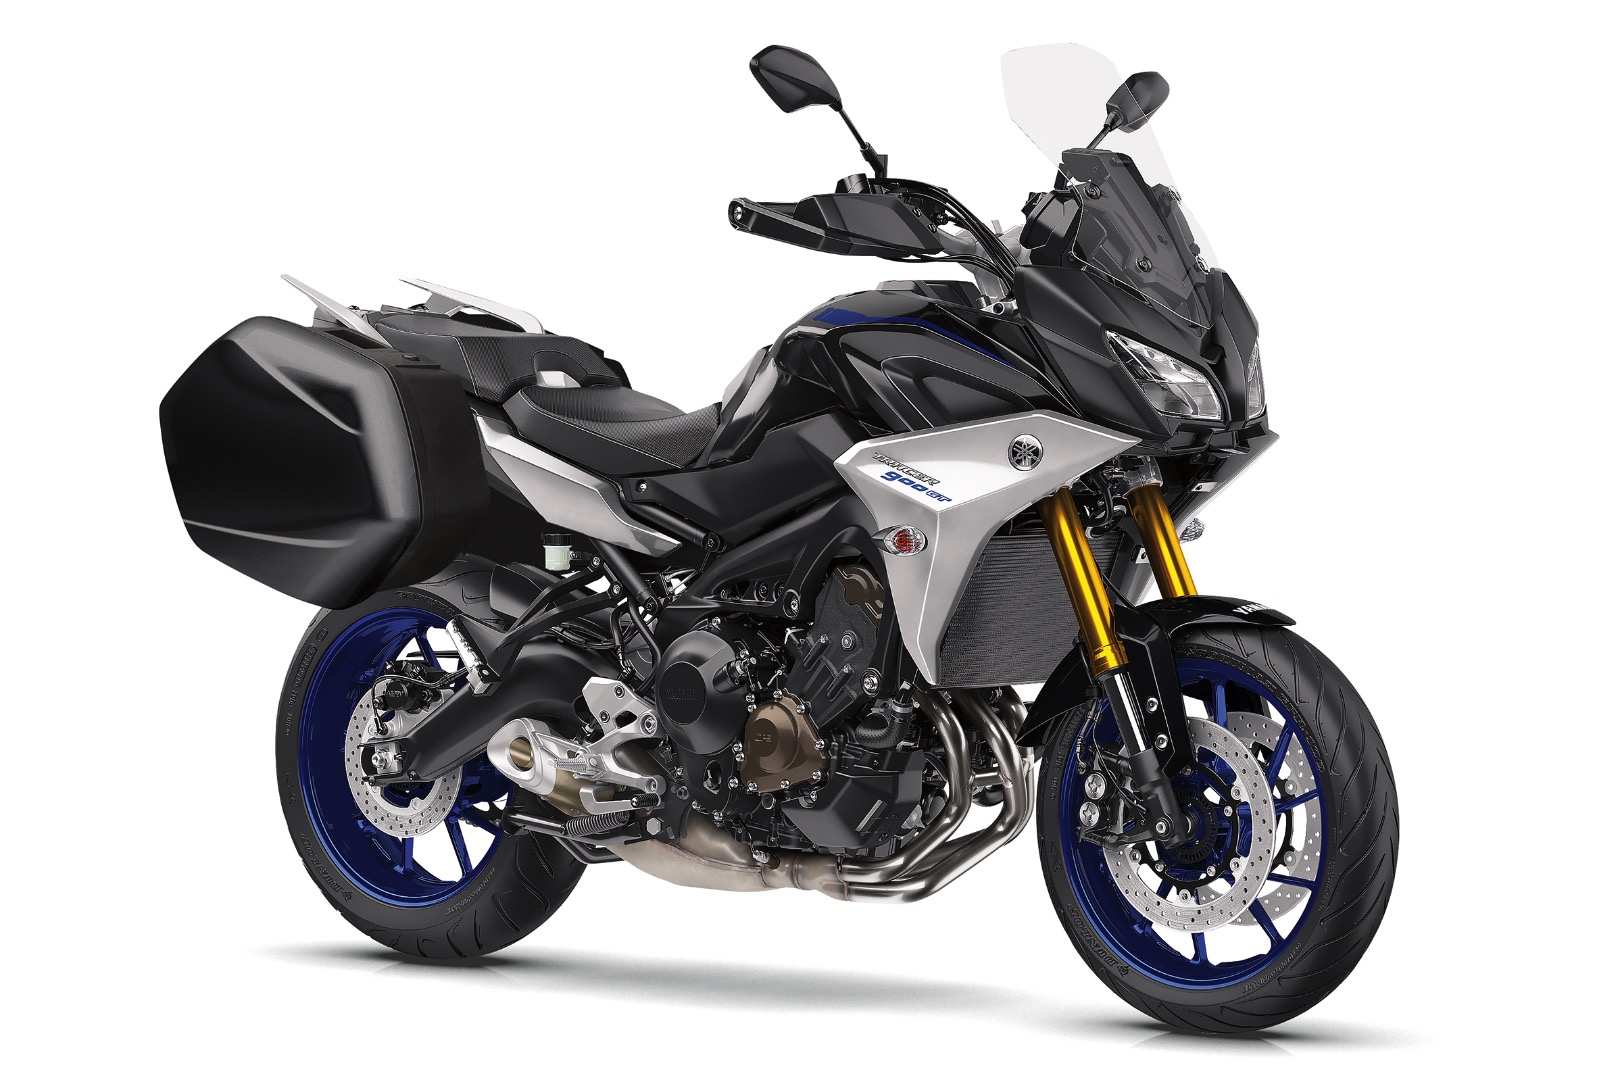 Review: 2019 Yamaha Tracer 900 GT - Bike Review